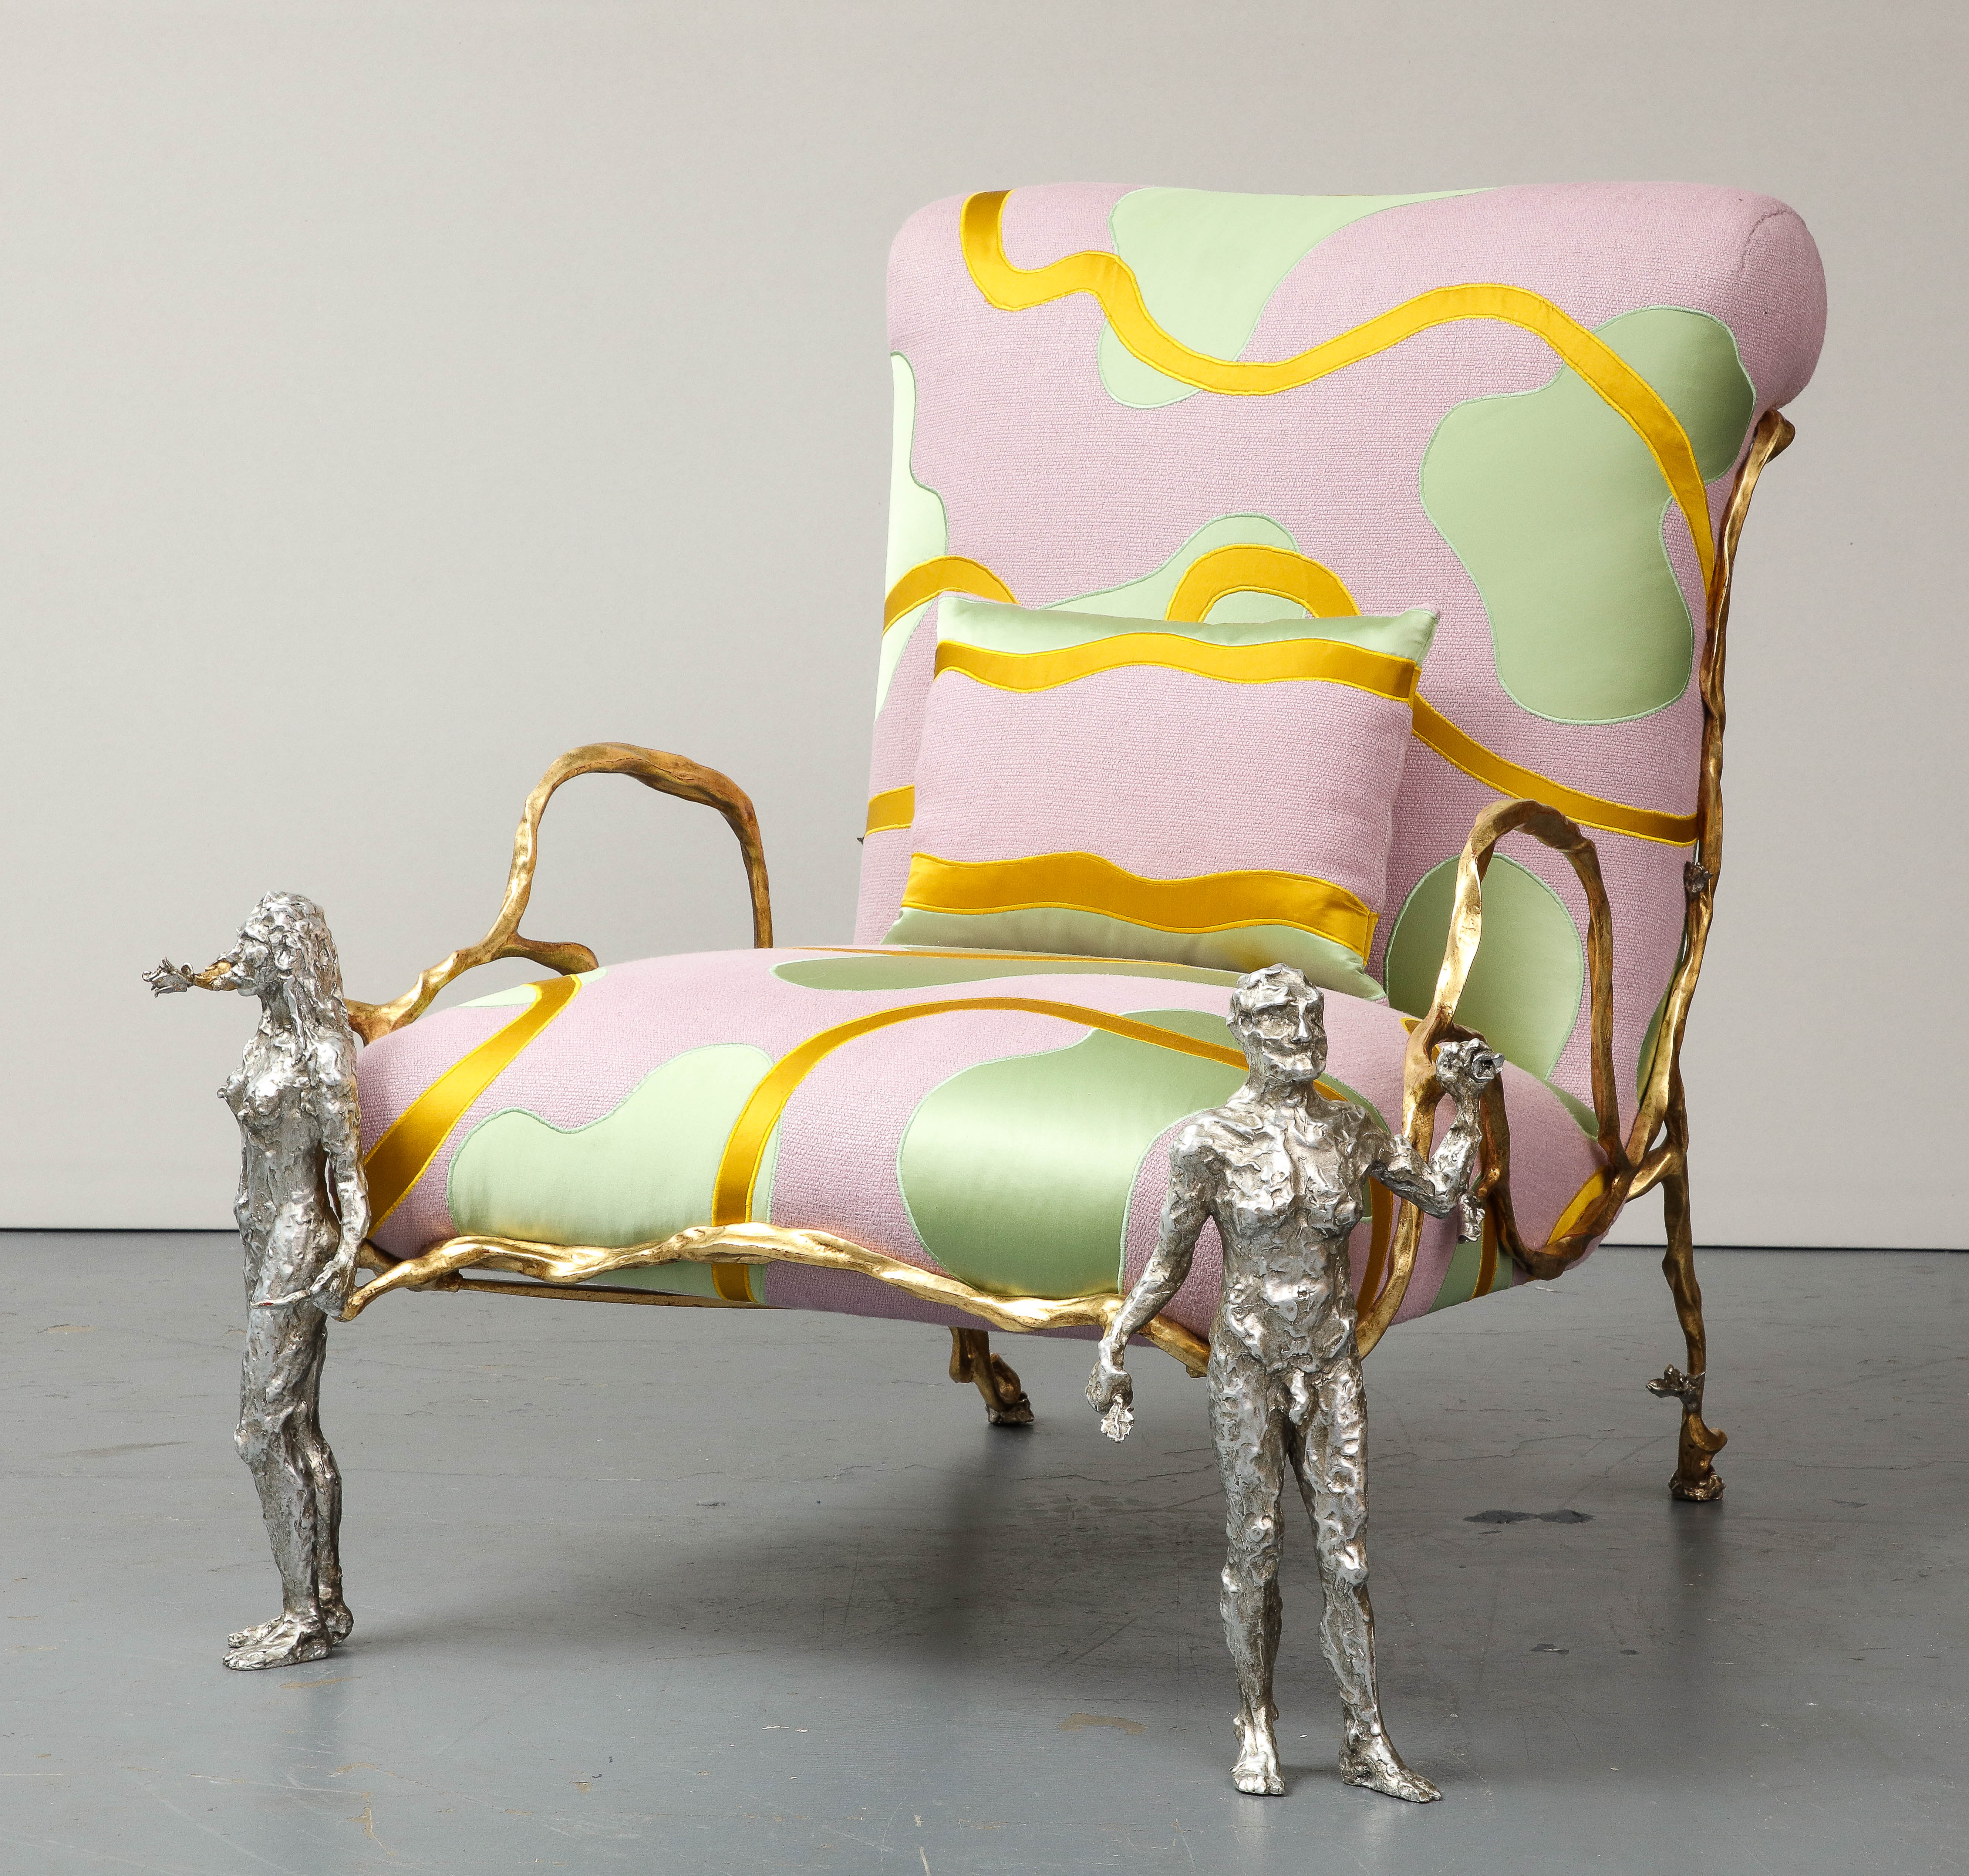 Playful and unique armchair by Mattia Bonetti. Bonetti employs a neo-baroque sensibility and attention to material and color in this staggering chair.

Silver gilded cast bronze with gold gilt frame; linen with silk satin appliqué upholstery.